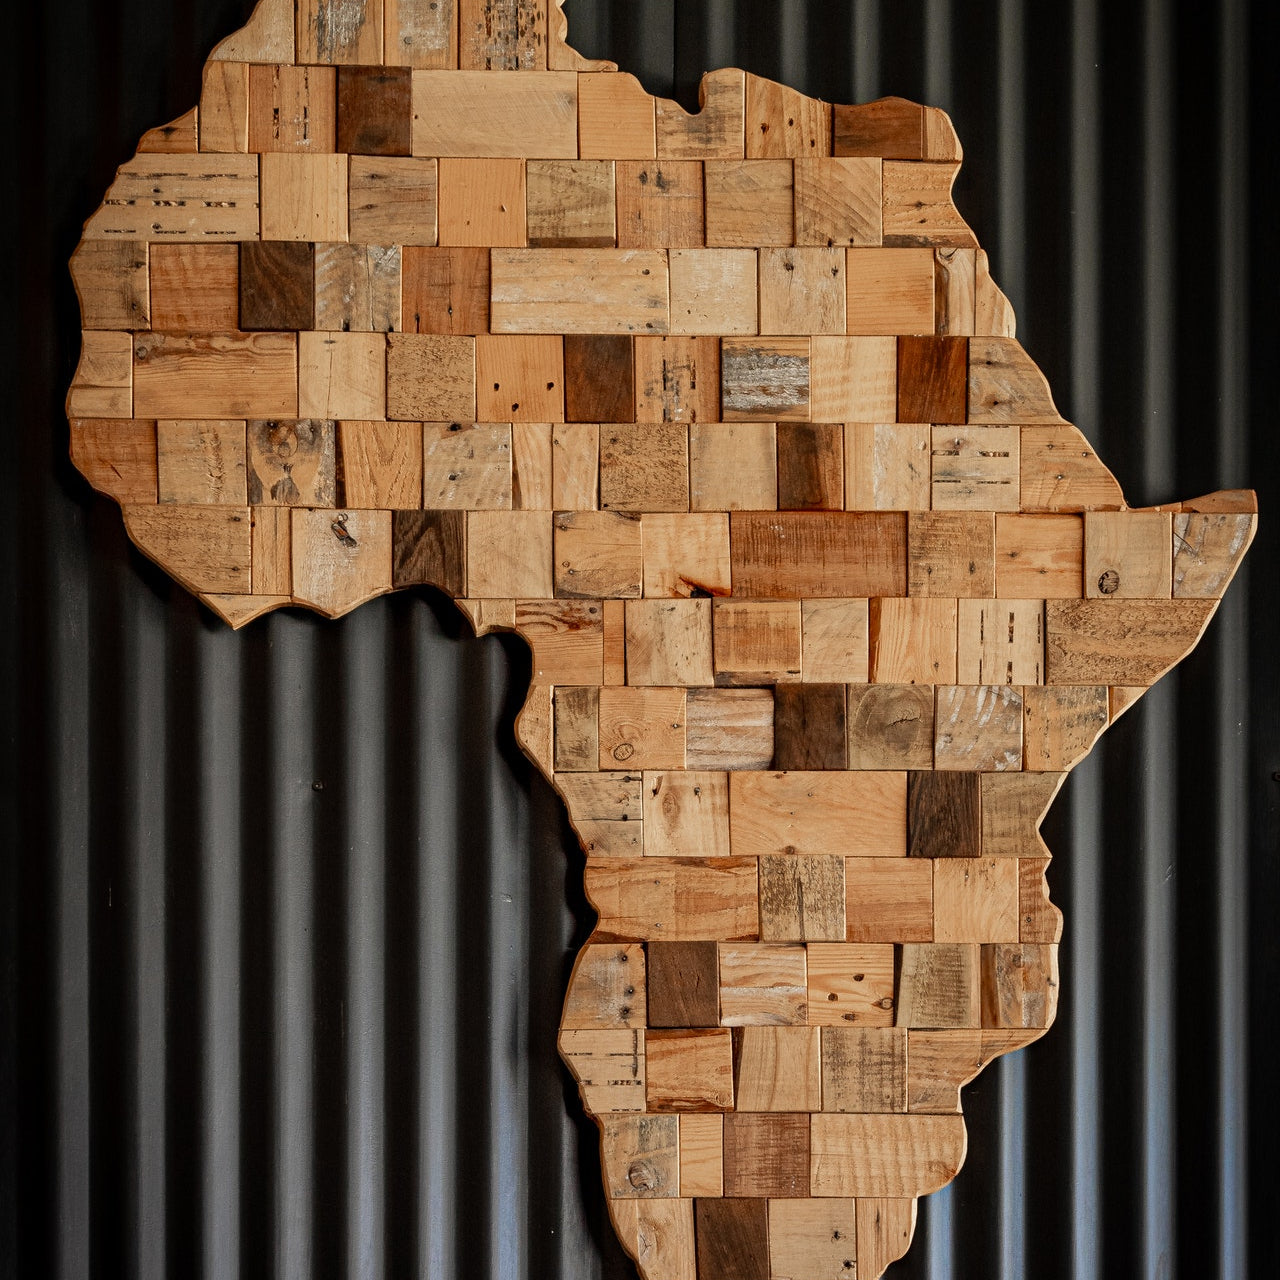 Brands at least 50% owned by people of the African diaspora.